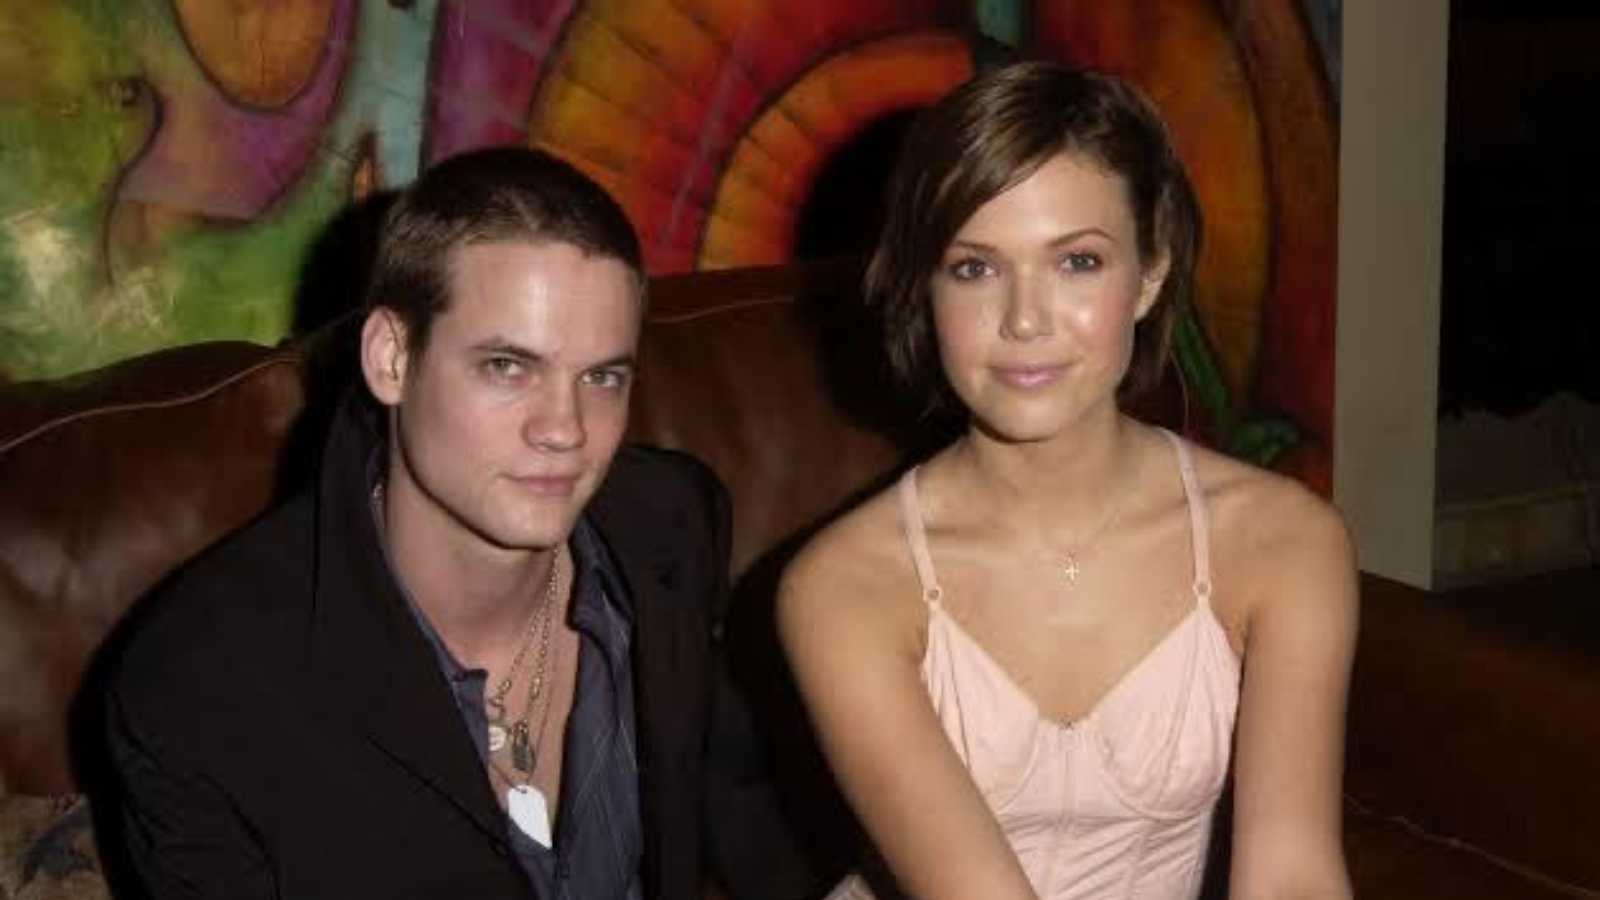 Mandy Moore and Shane West developed a crush on each other during the filming of 'A Walk To Remember.'